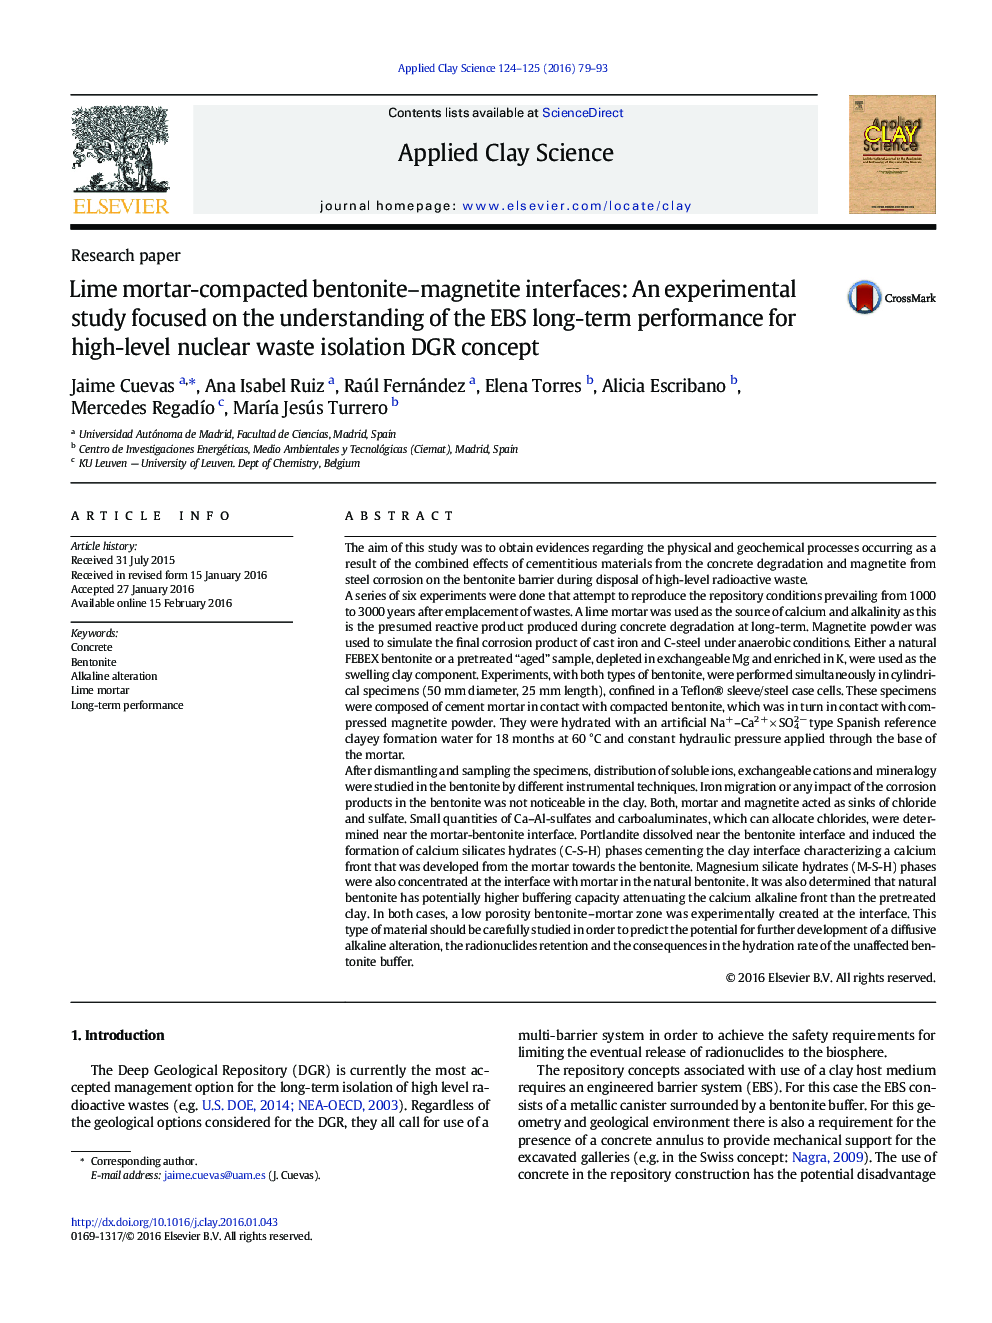 Lime mortar-compacted bentonite-magnetite interfaces: An experimental study focused on the understanding of the EBS long-term performance for high-level nuclear waste isolation DGR concept